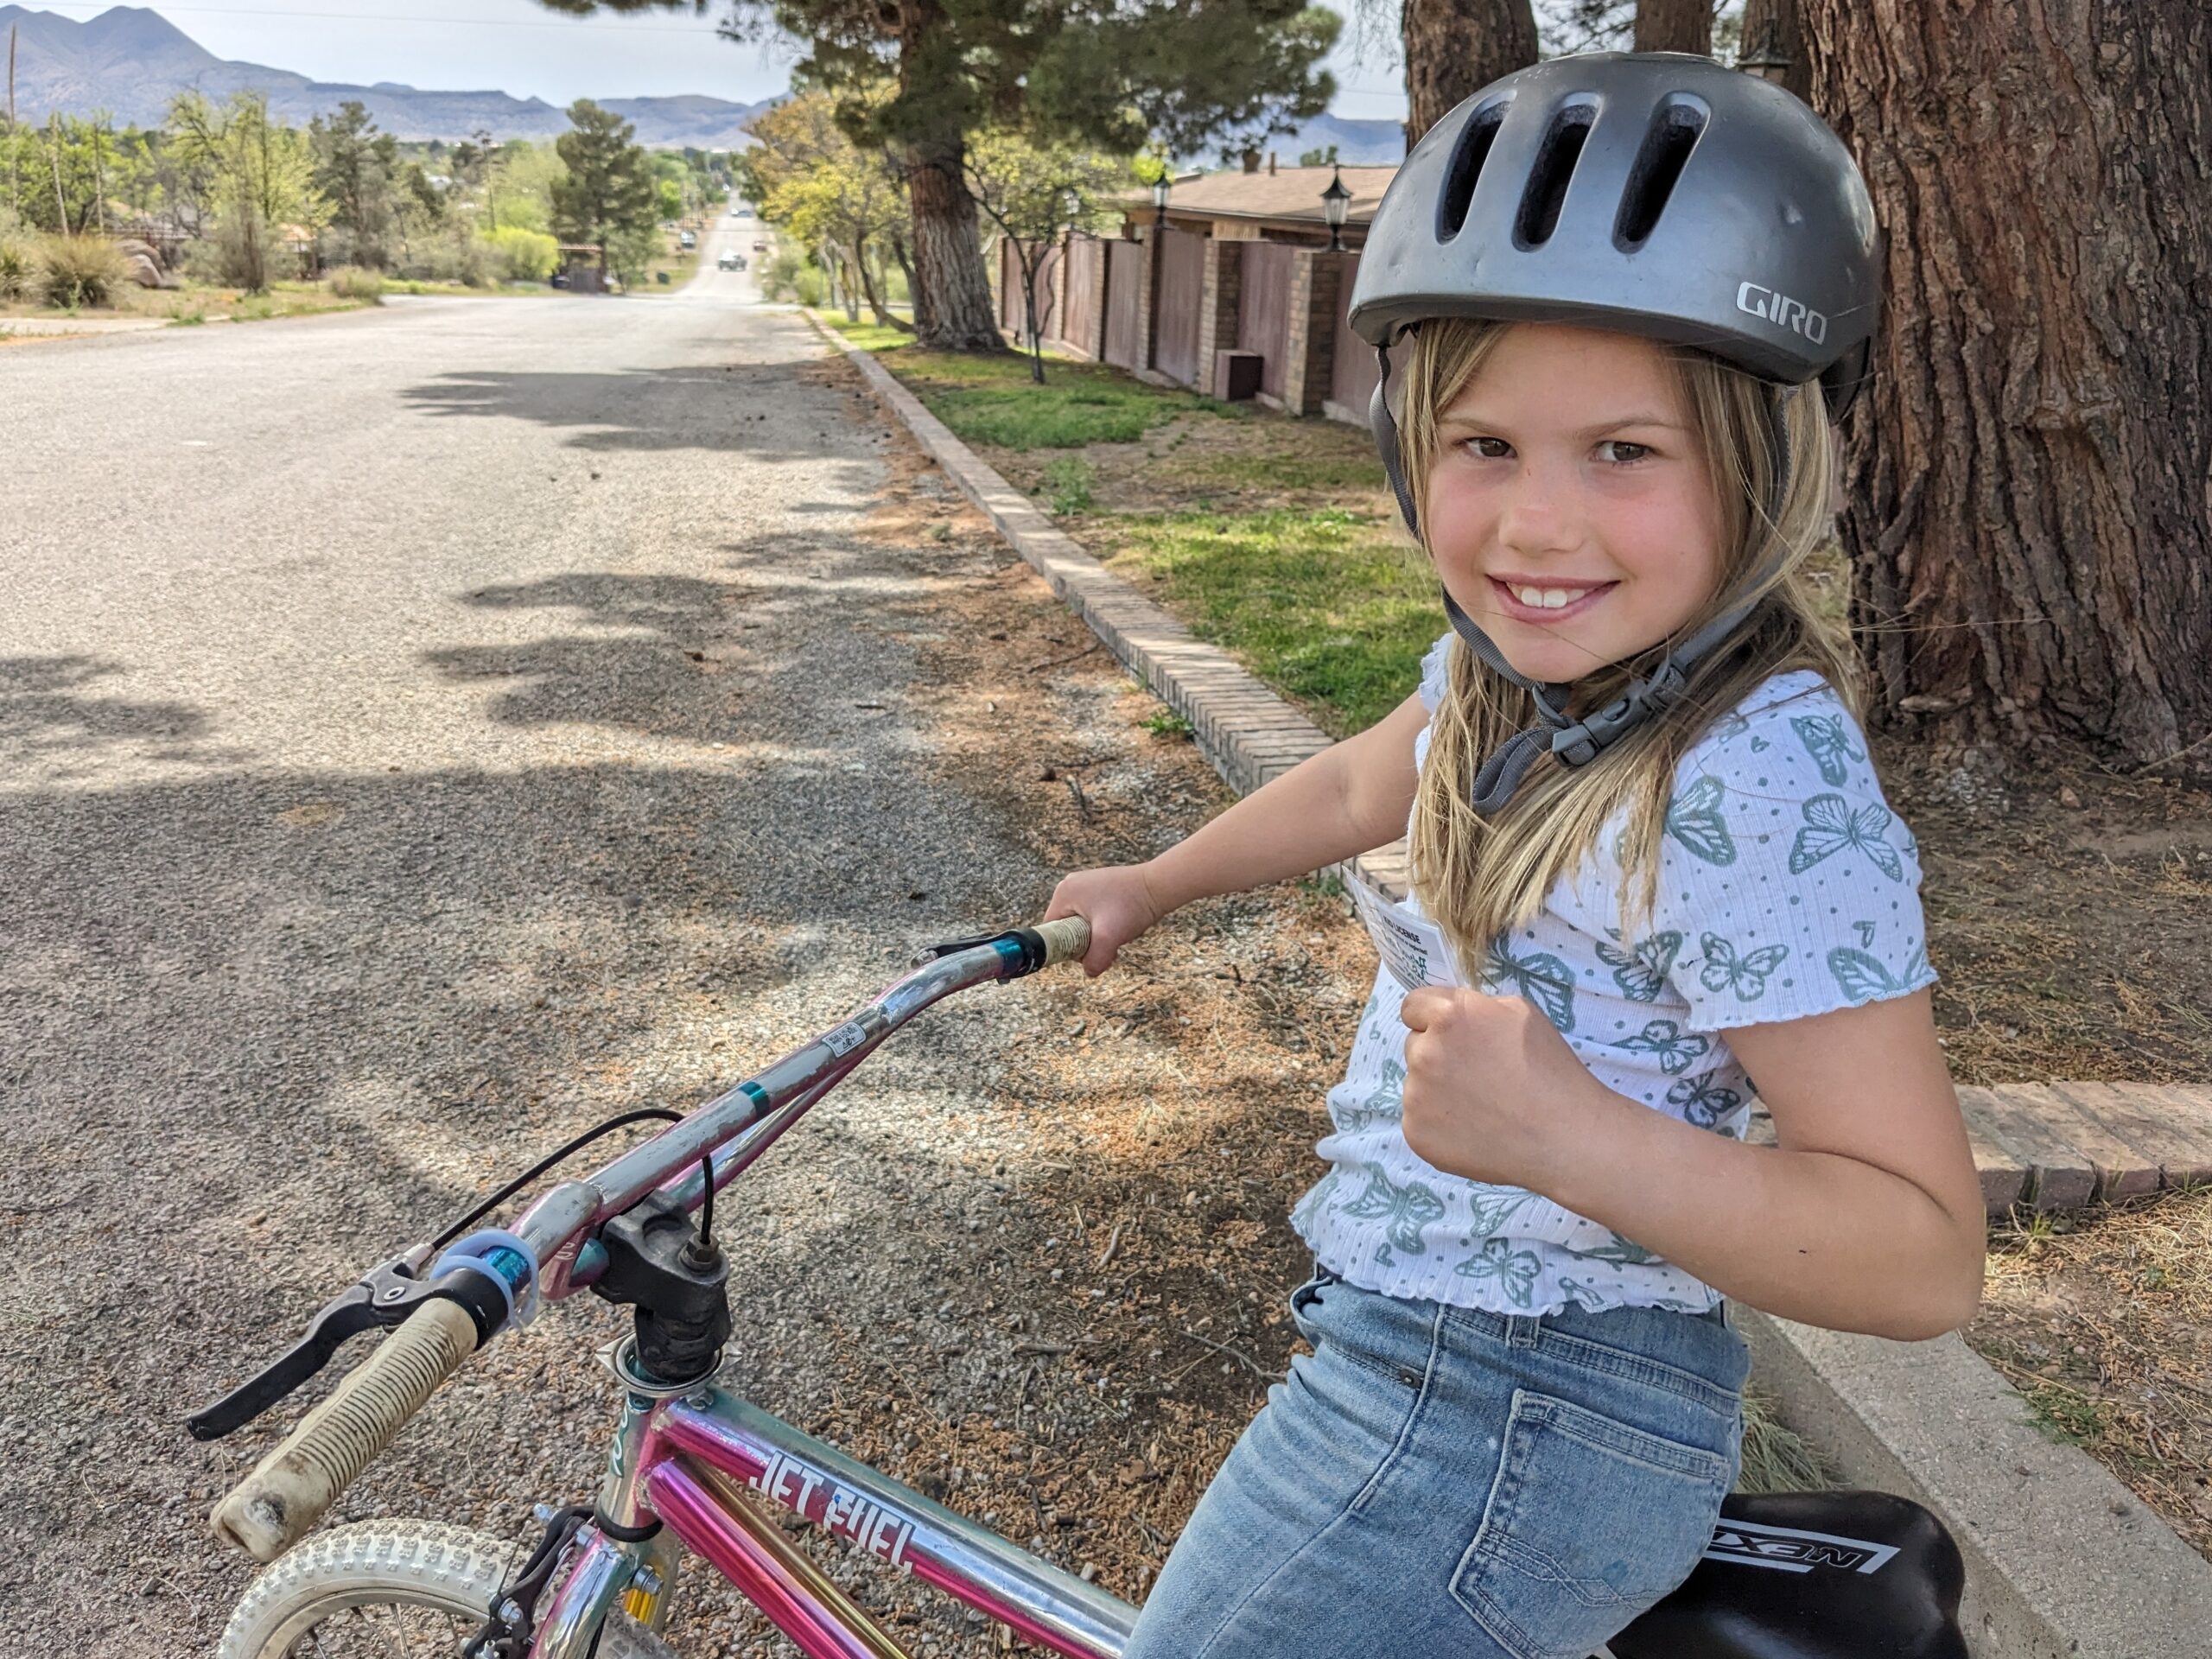 The author's 8-year-old daughter Rosy has a 'kids' license,' showing she has her parents' permission to ride her bike around her Texas hometown.